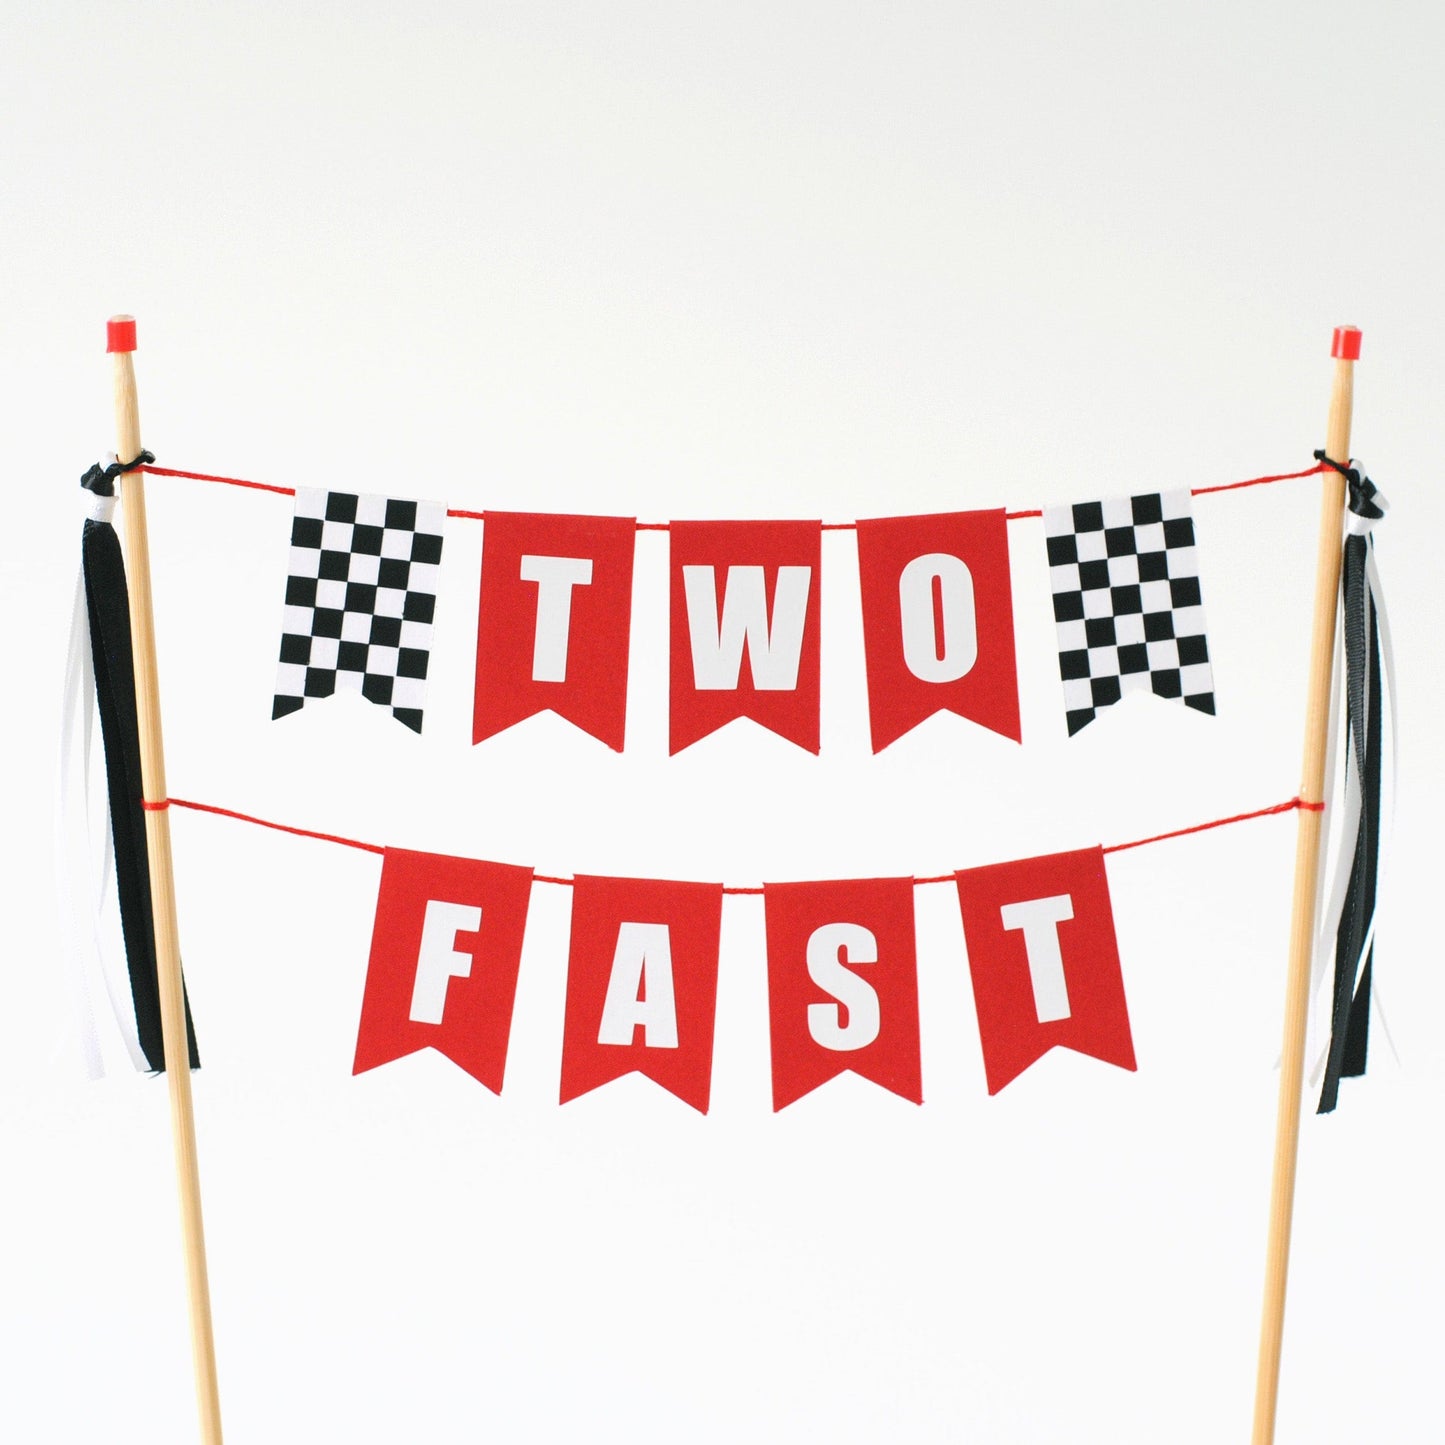 
                  
                    TWO FAST birthday cake topper for race car theme birthday | personalized cake toppers by Avalon Sunshine
                  
                